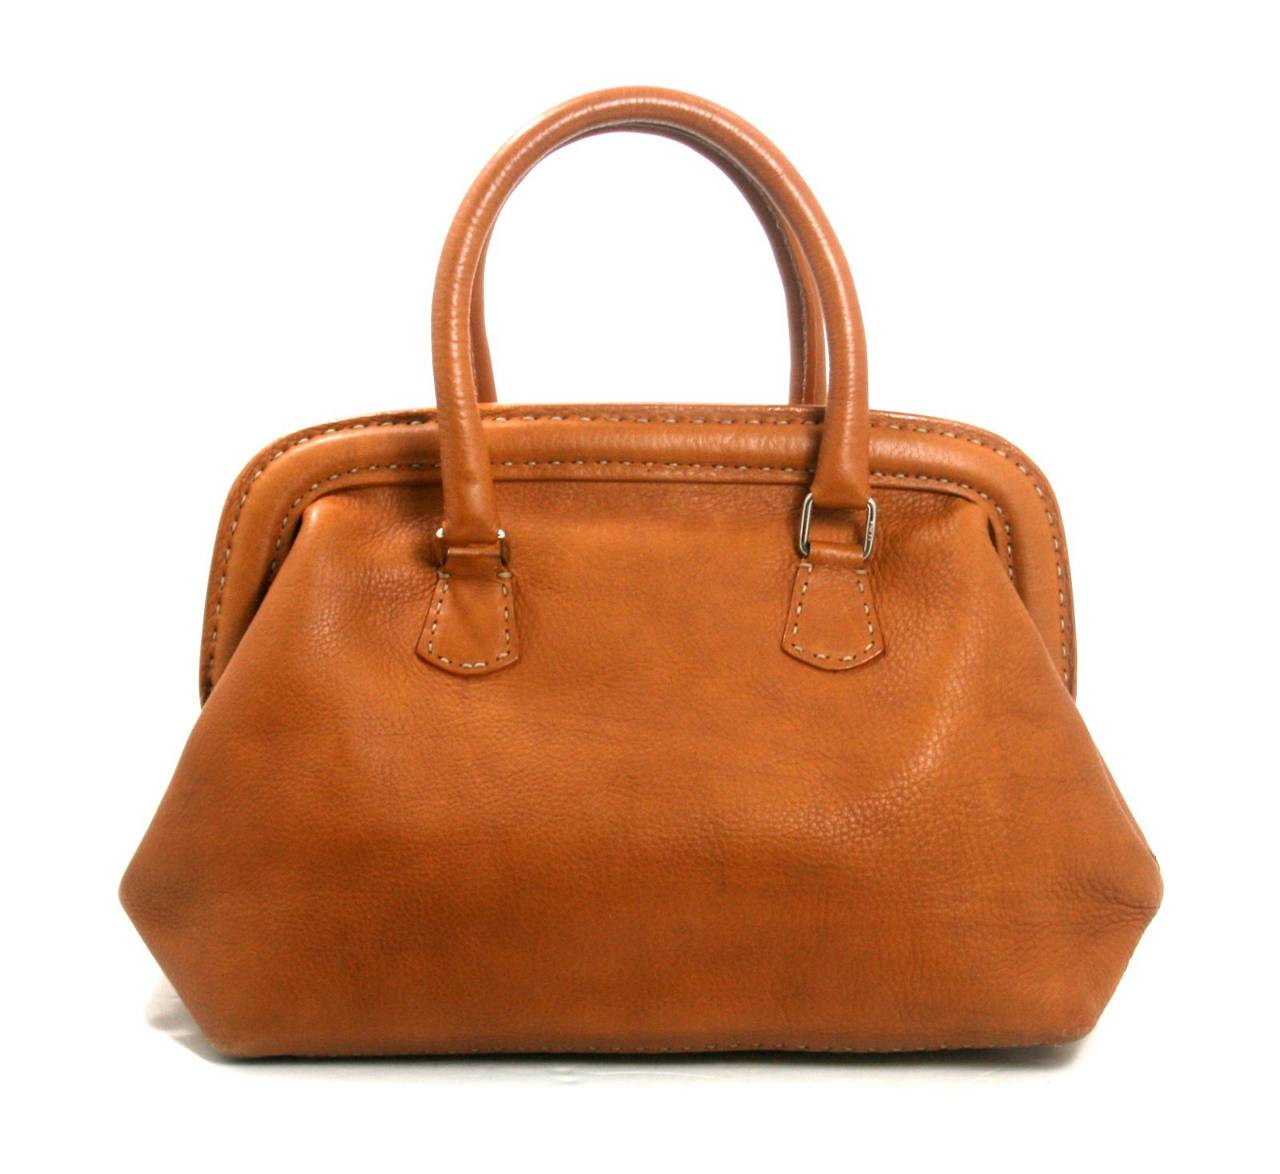 In very good condition, this Fendi Cognac Selleria Leather Doctor Bag is an iconic silhouette. There is light wear around the bottom edges and some minor white mars on the exterior.  The interior is generally clean, though there is an ink mark on